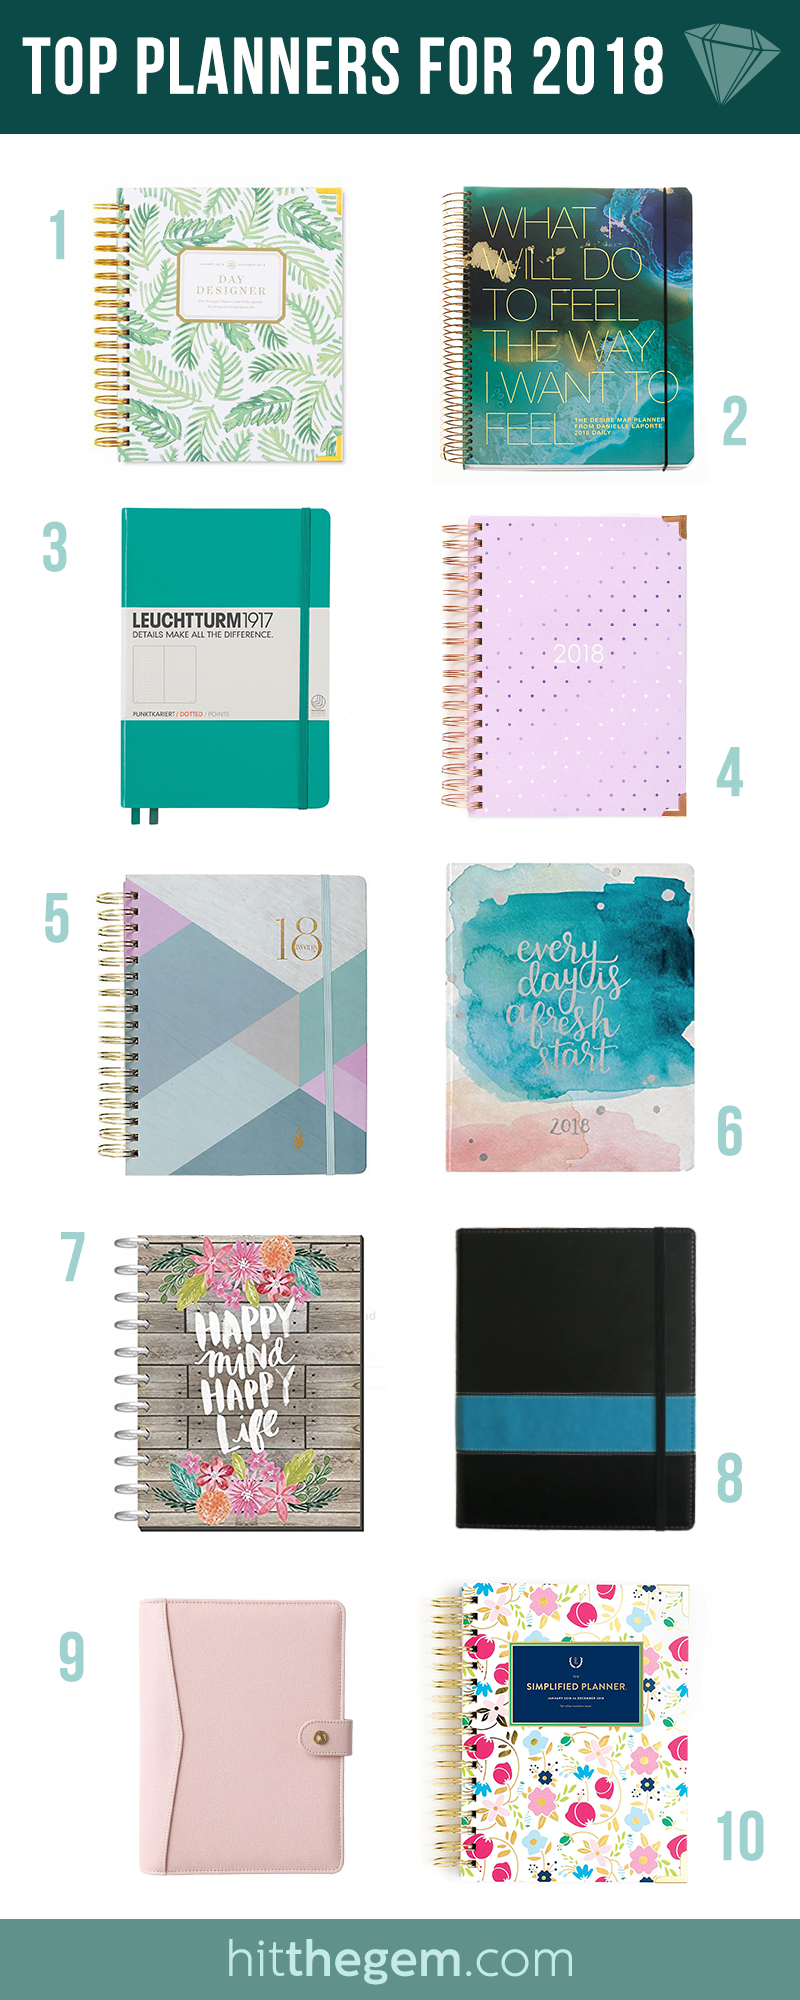 Trying to decide on which 2018 planner is for you? Look no further! Here are the top 10 planners reviewed and recommended for organization, productivity, and focus. 